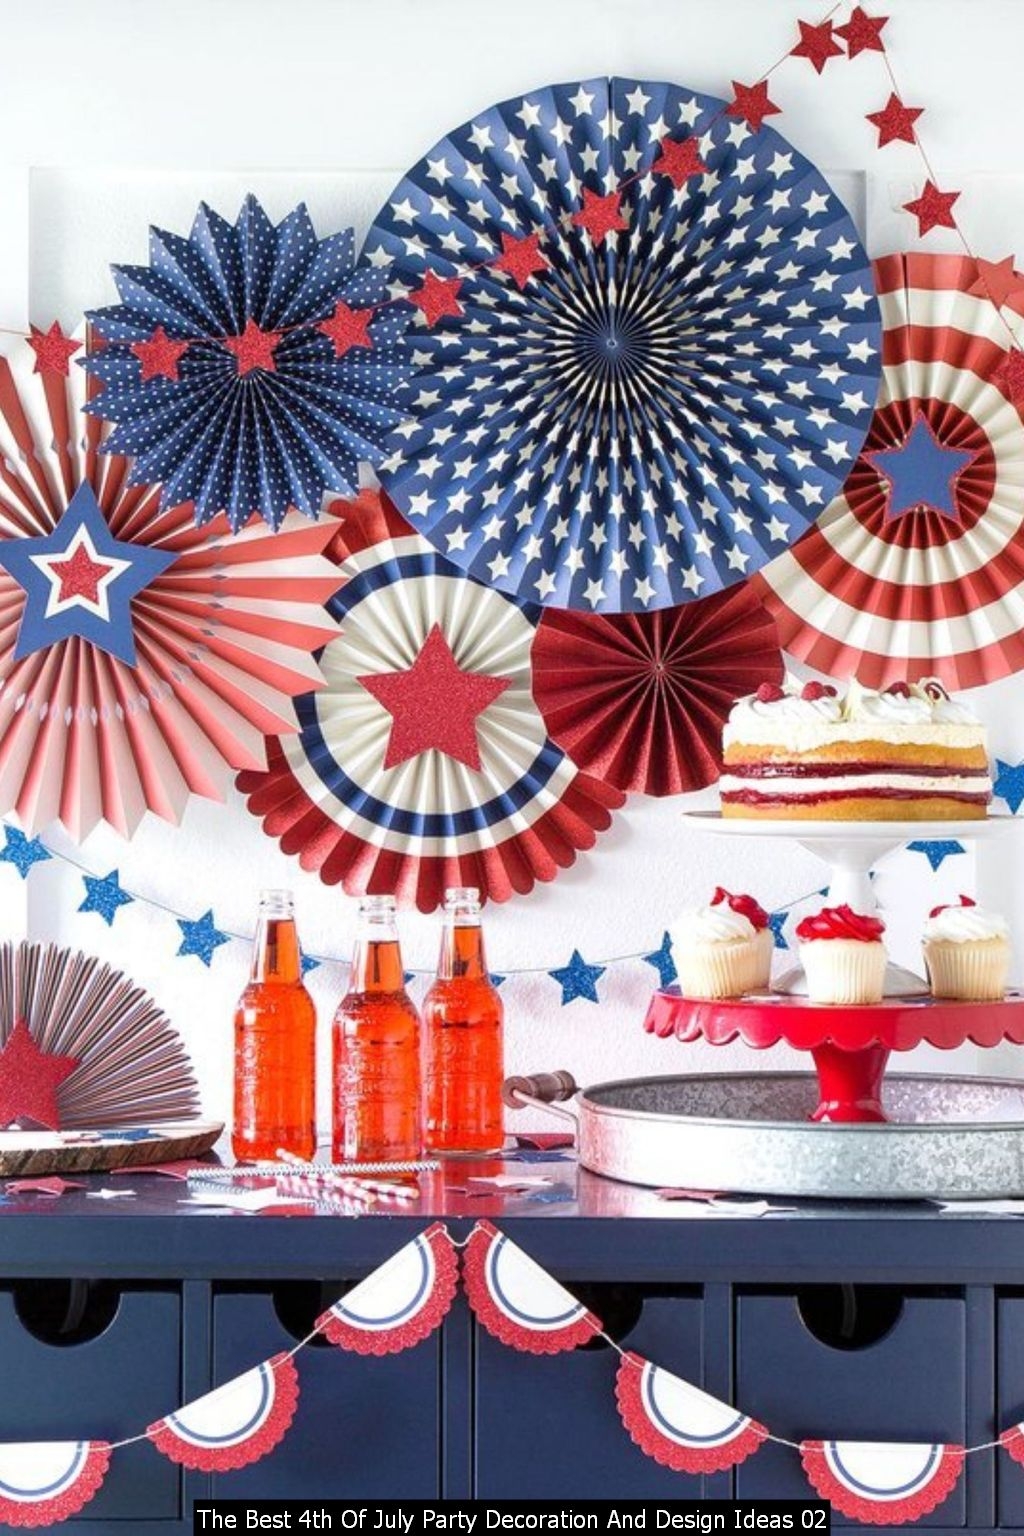 The Best 4th Of July Party Decoration And Design Ideas 02